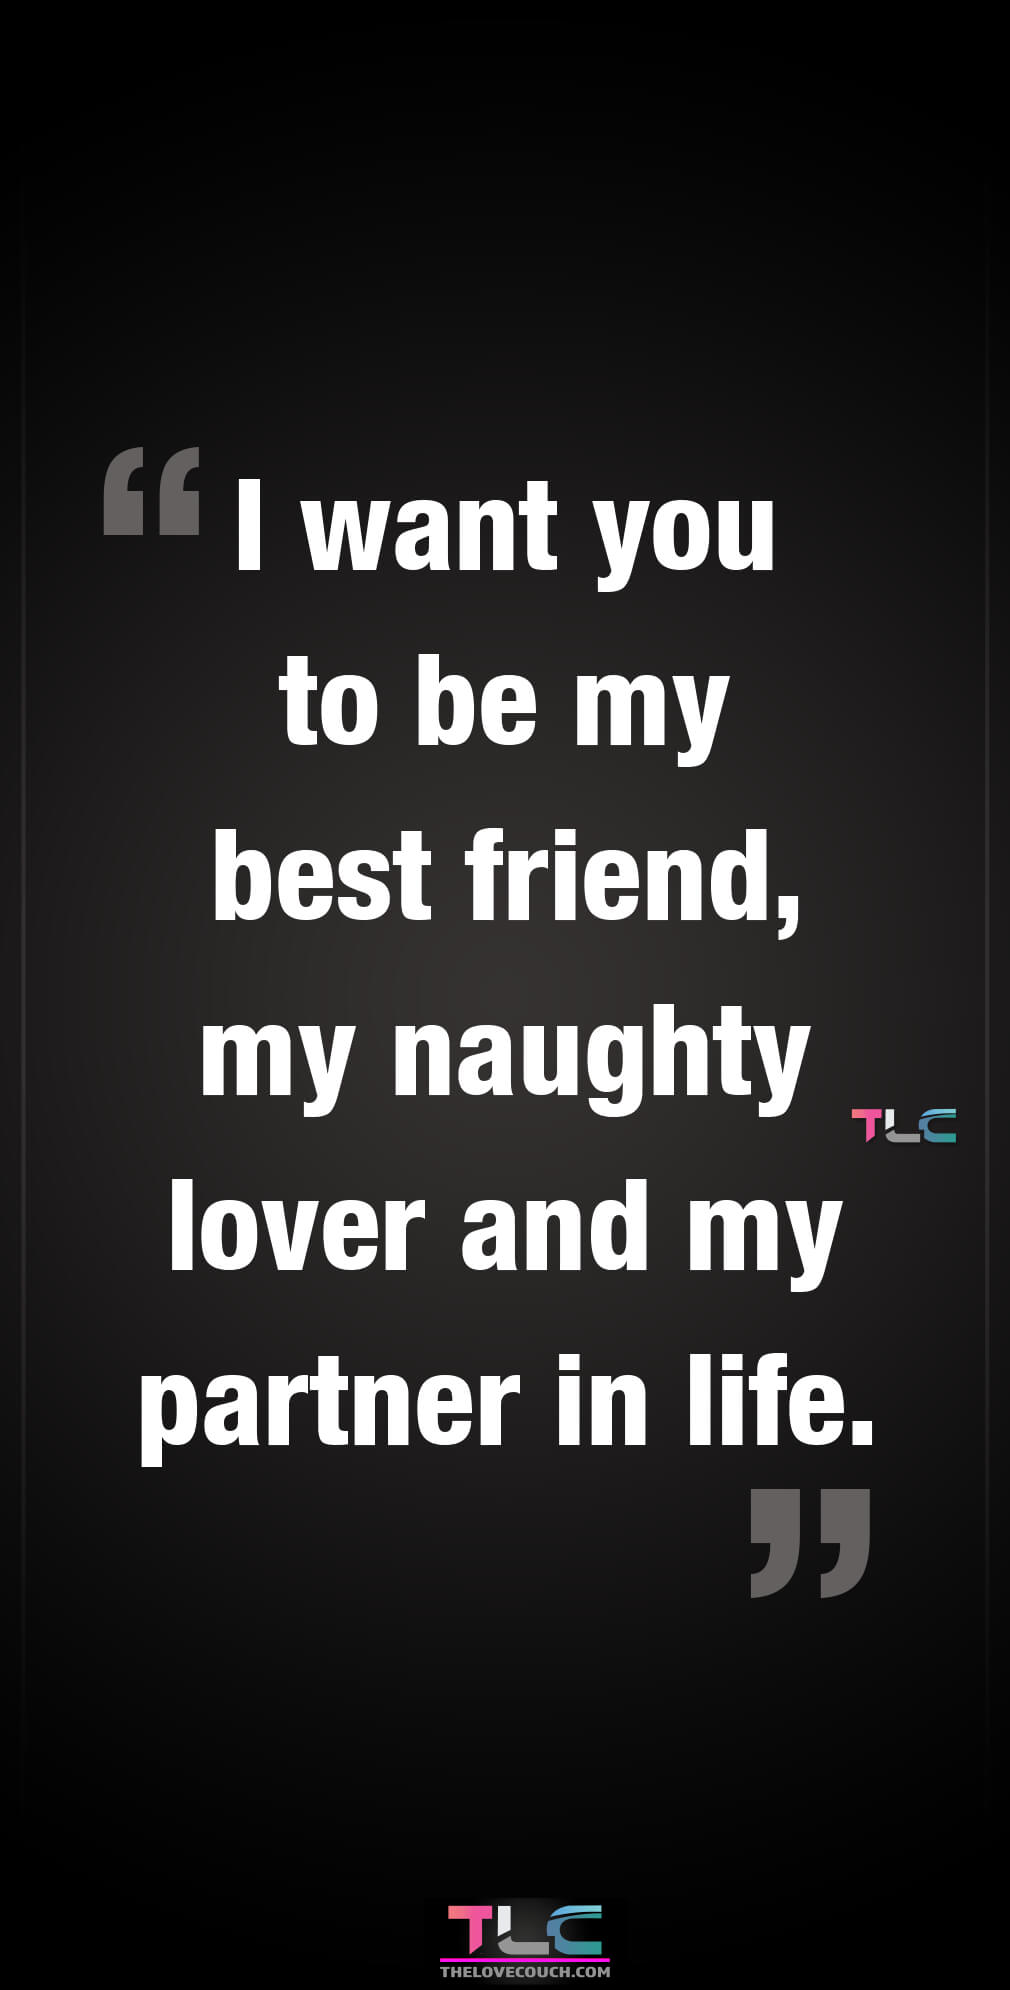 I want you to be my best friend, my naughty lover and my partner in life.